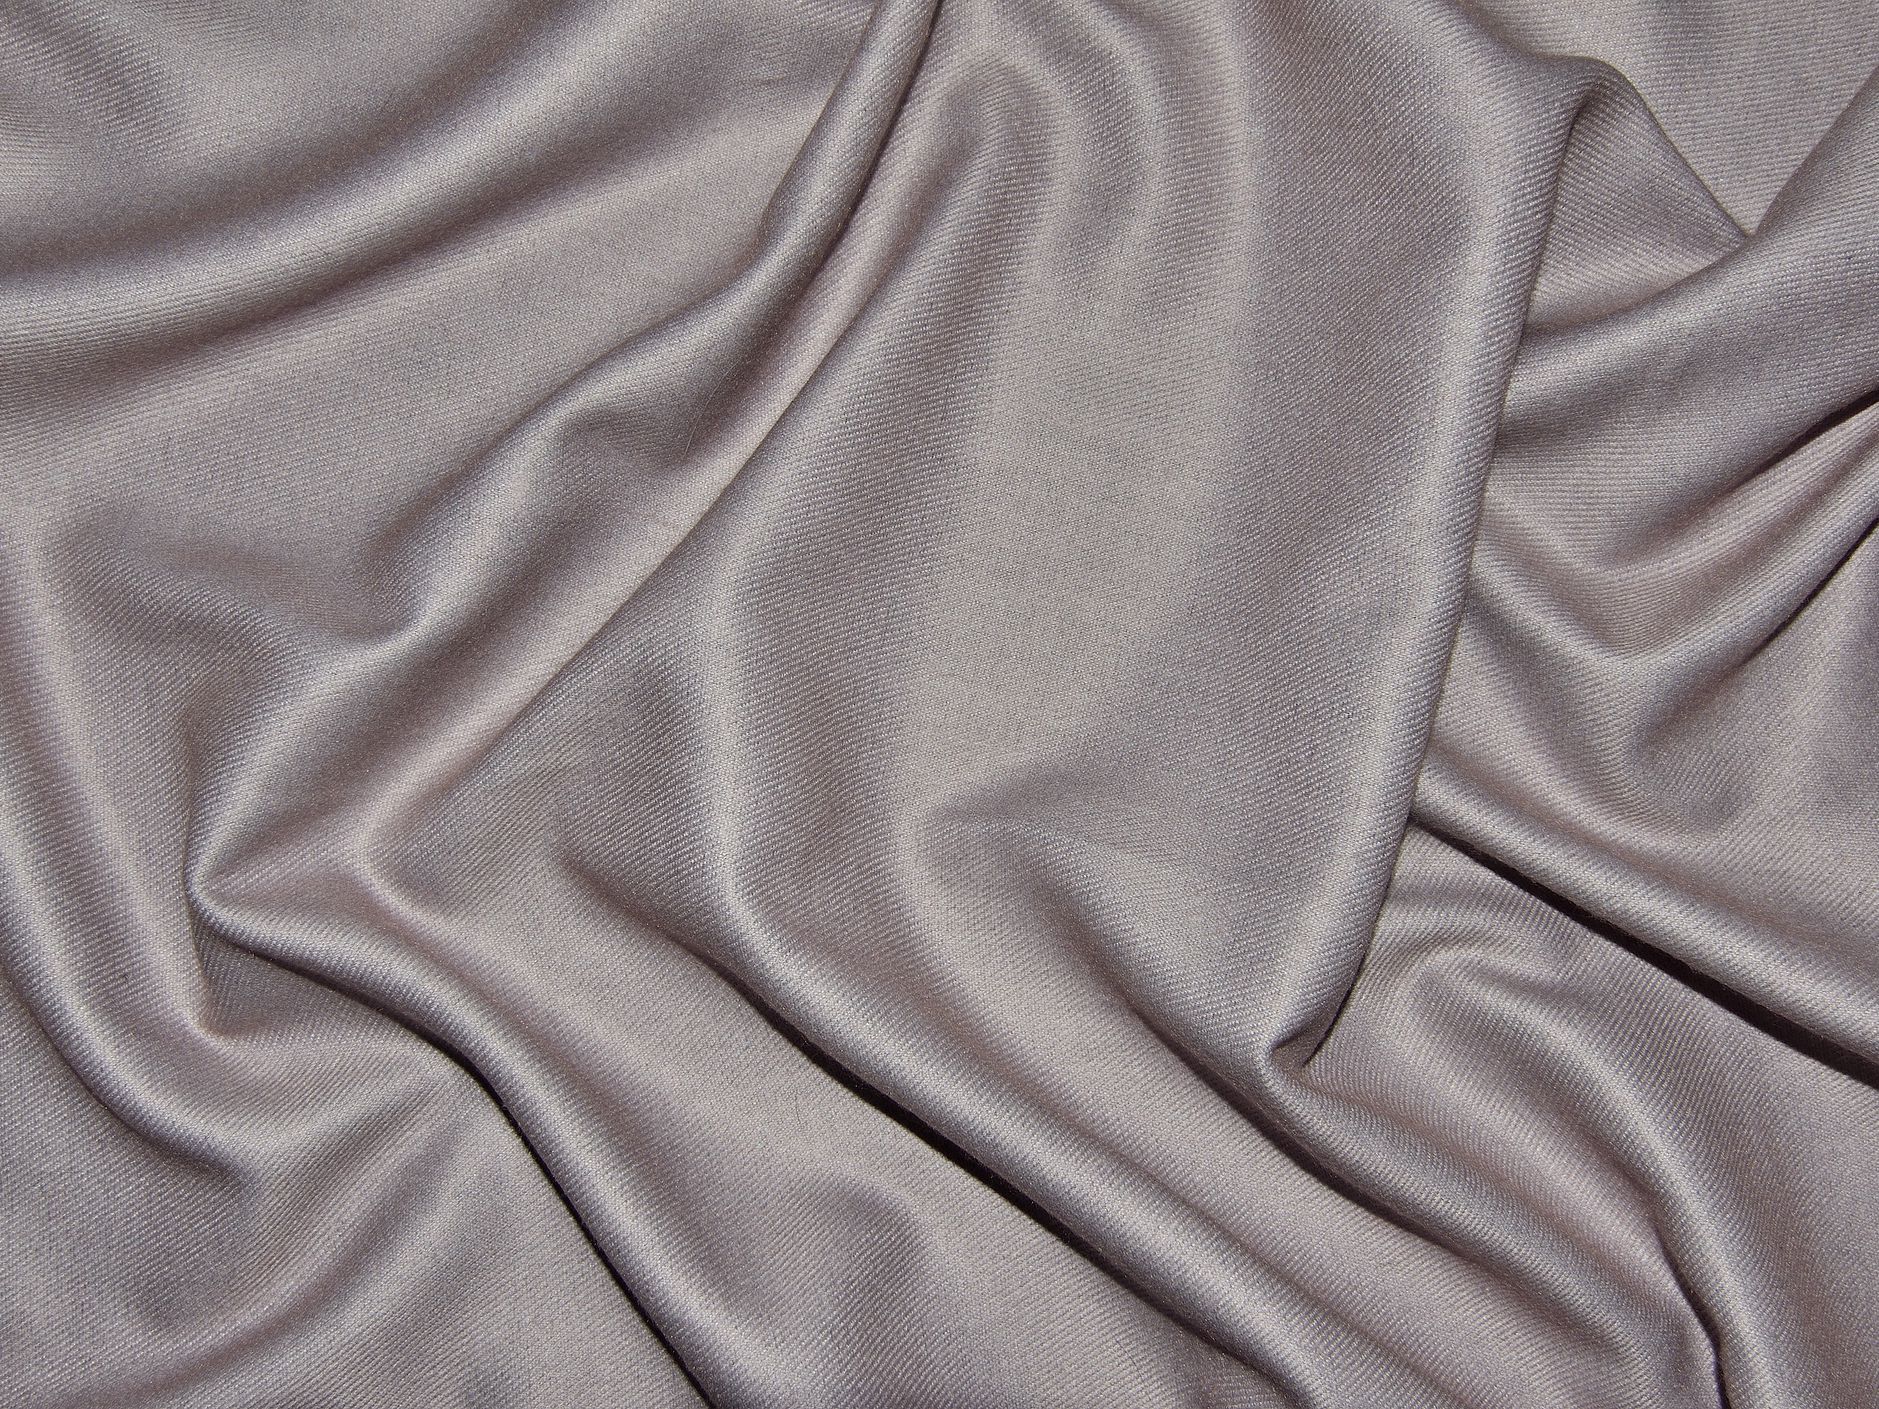 Comparing Viscose To Other Fabrics